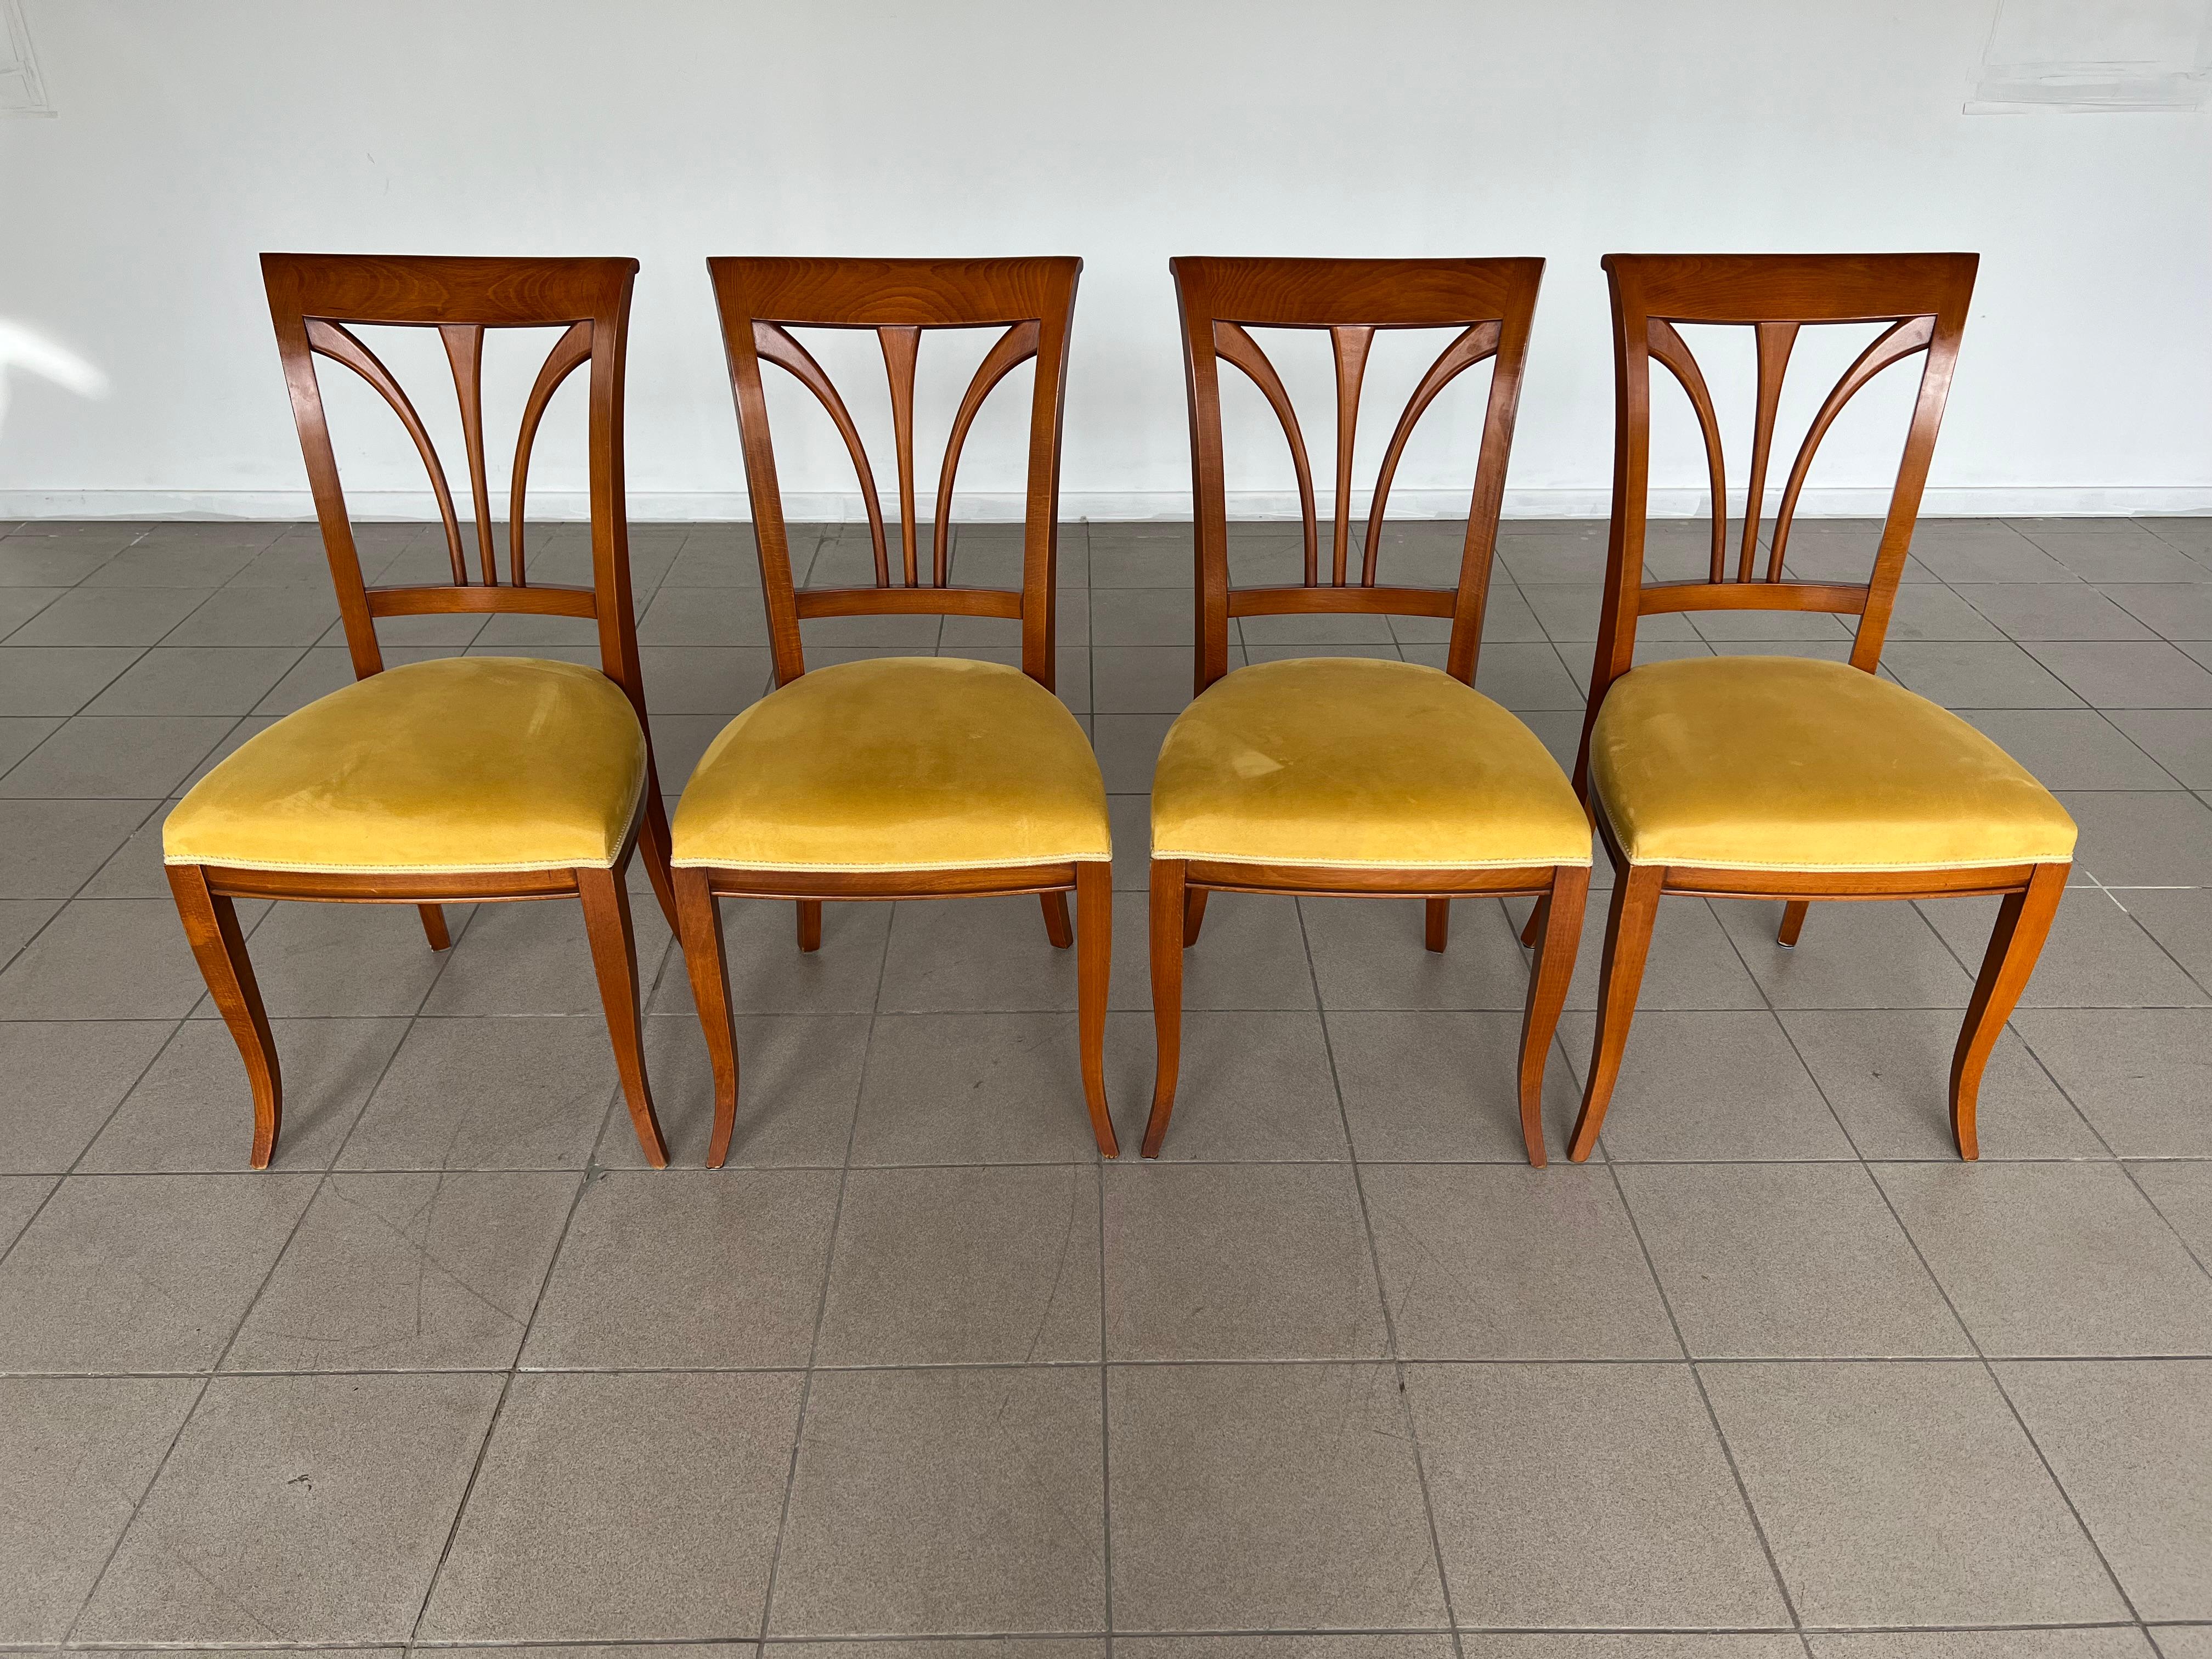 20th Century Vintage Biedermeier Style Reupholstered Dining Chairs - Set of 4